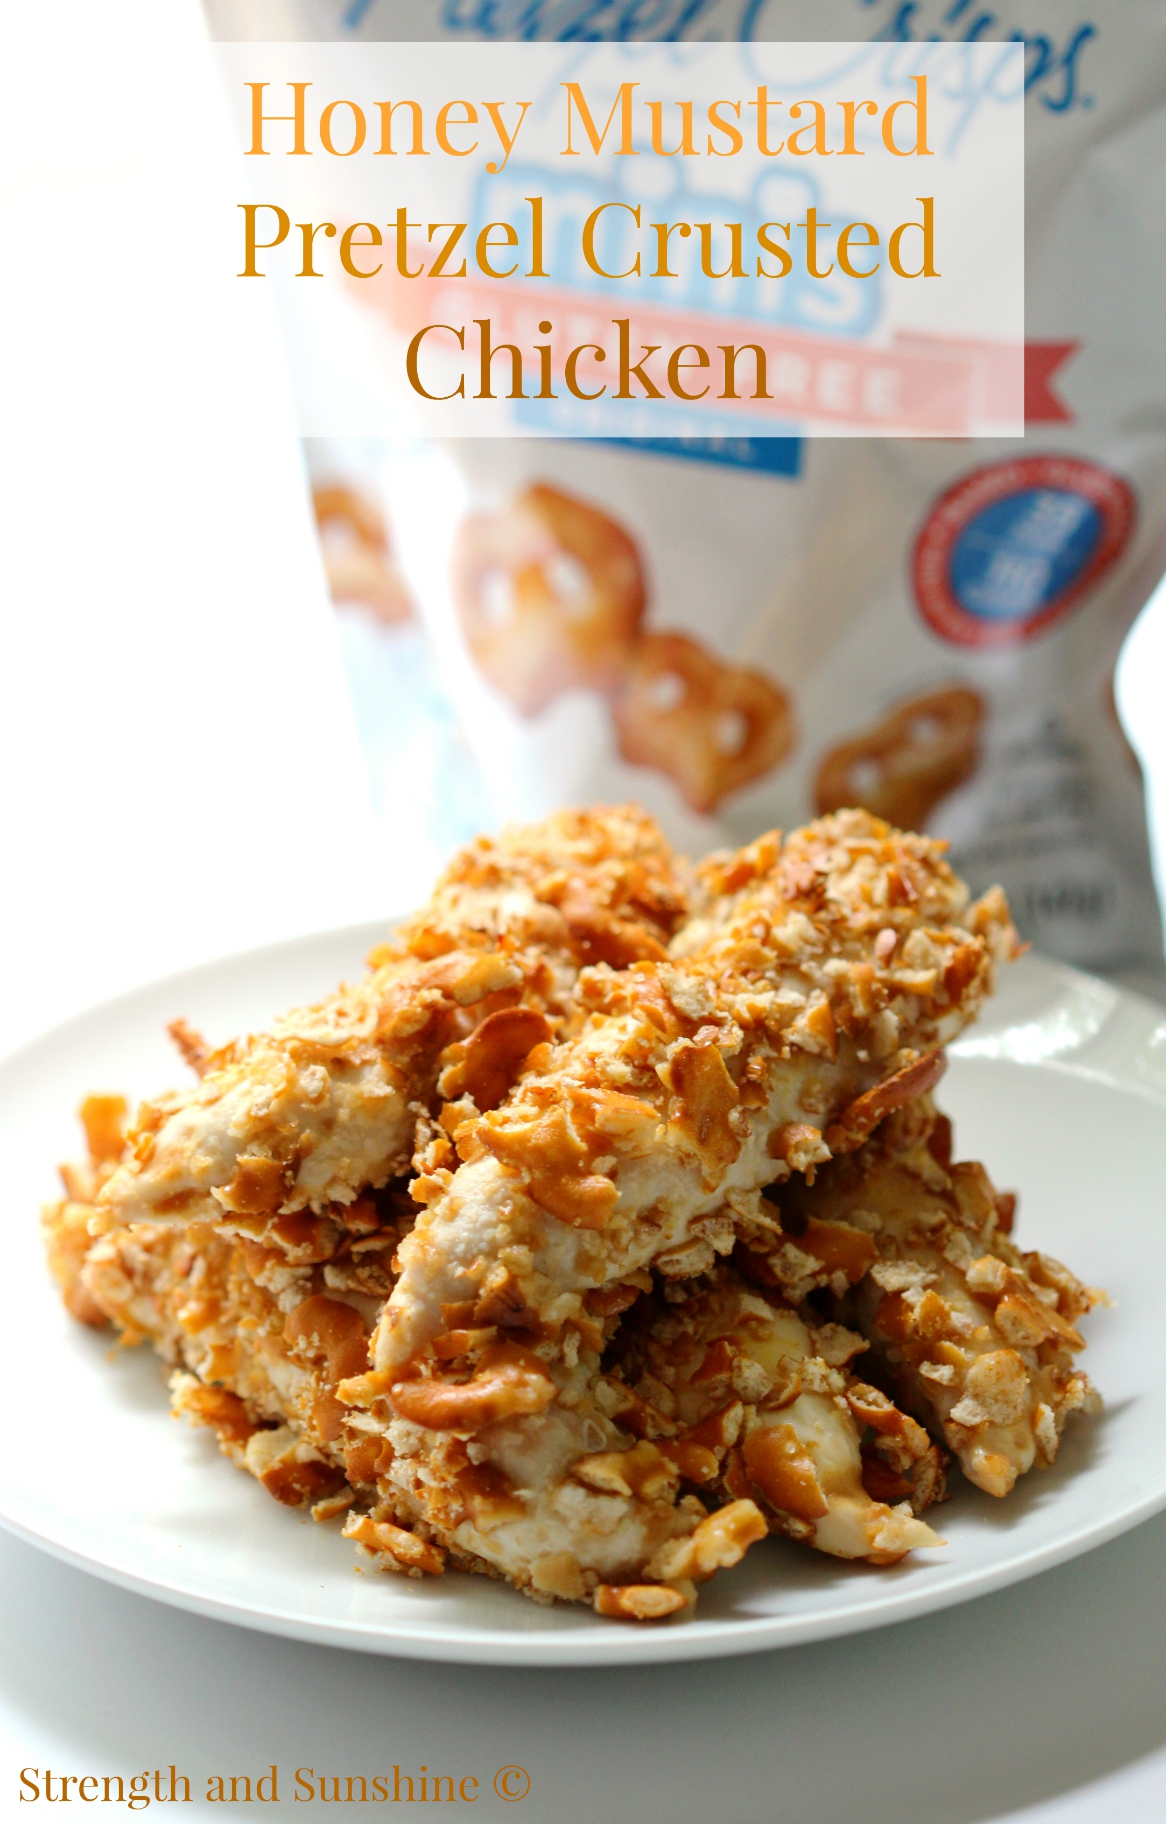 Honey Mustard Pretzel Crusted Chicken | Strength and Sunshine @RebeccaGF666 Make your chicken fun and delicious, while still being a healthy option for the family. Chicken coated in honey mustard then rolled in gluten-free pretzel crisps couldn't be any easier to whip up for a weeknight dinner. Egg-free, dairy-free, nut-free and soy-free as well!